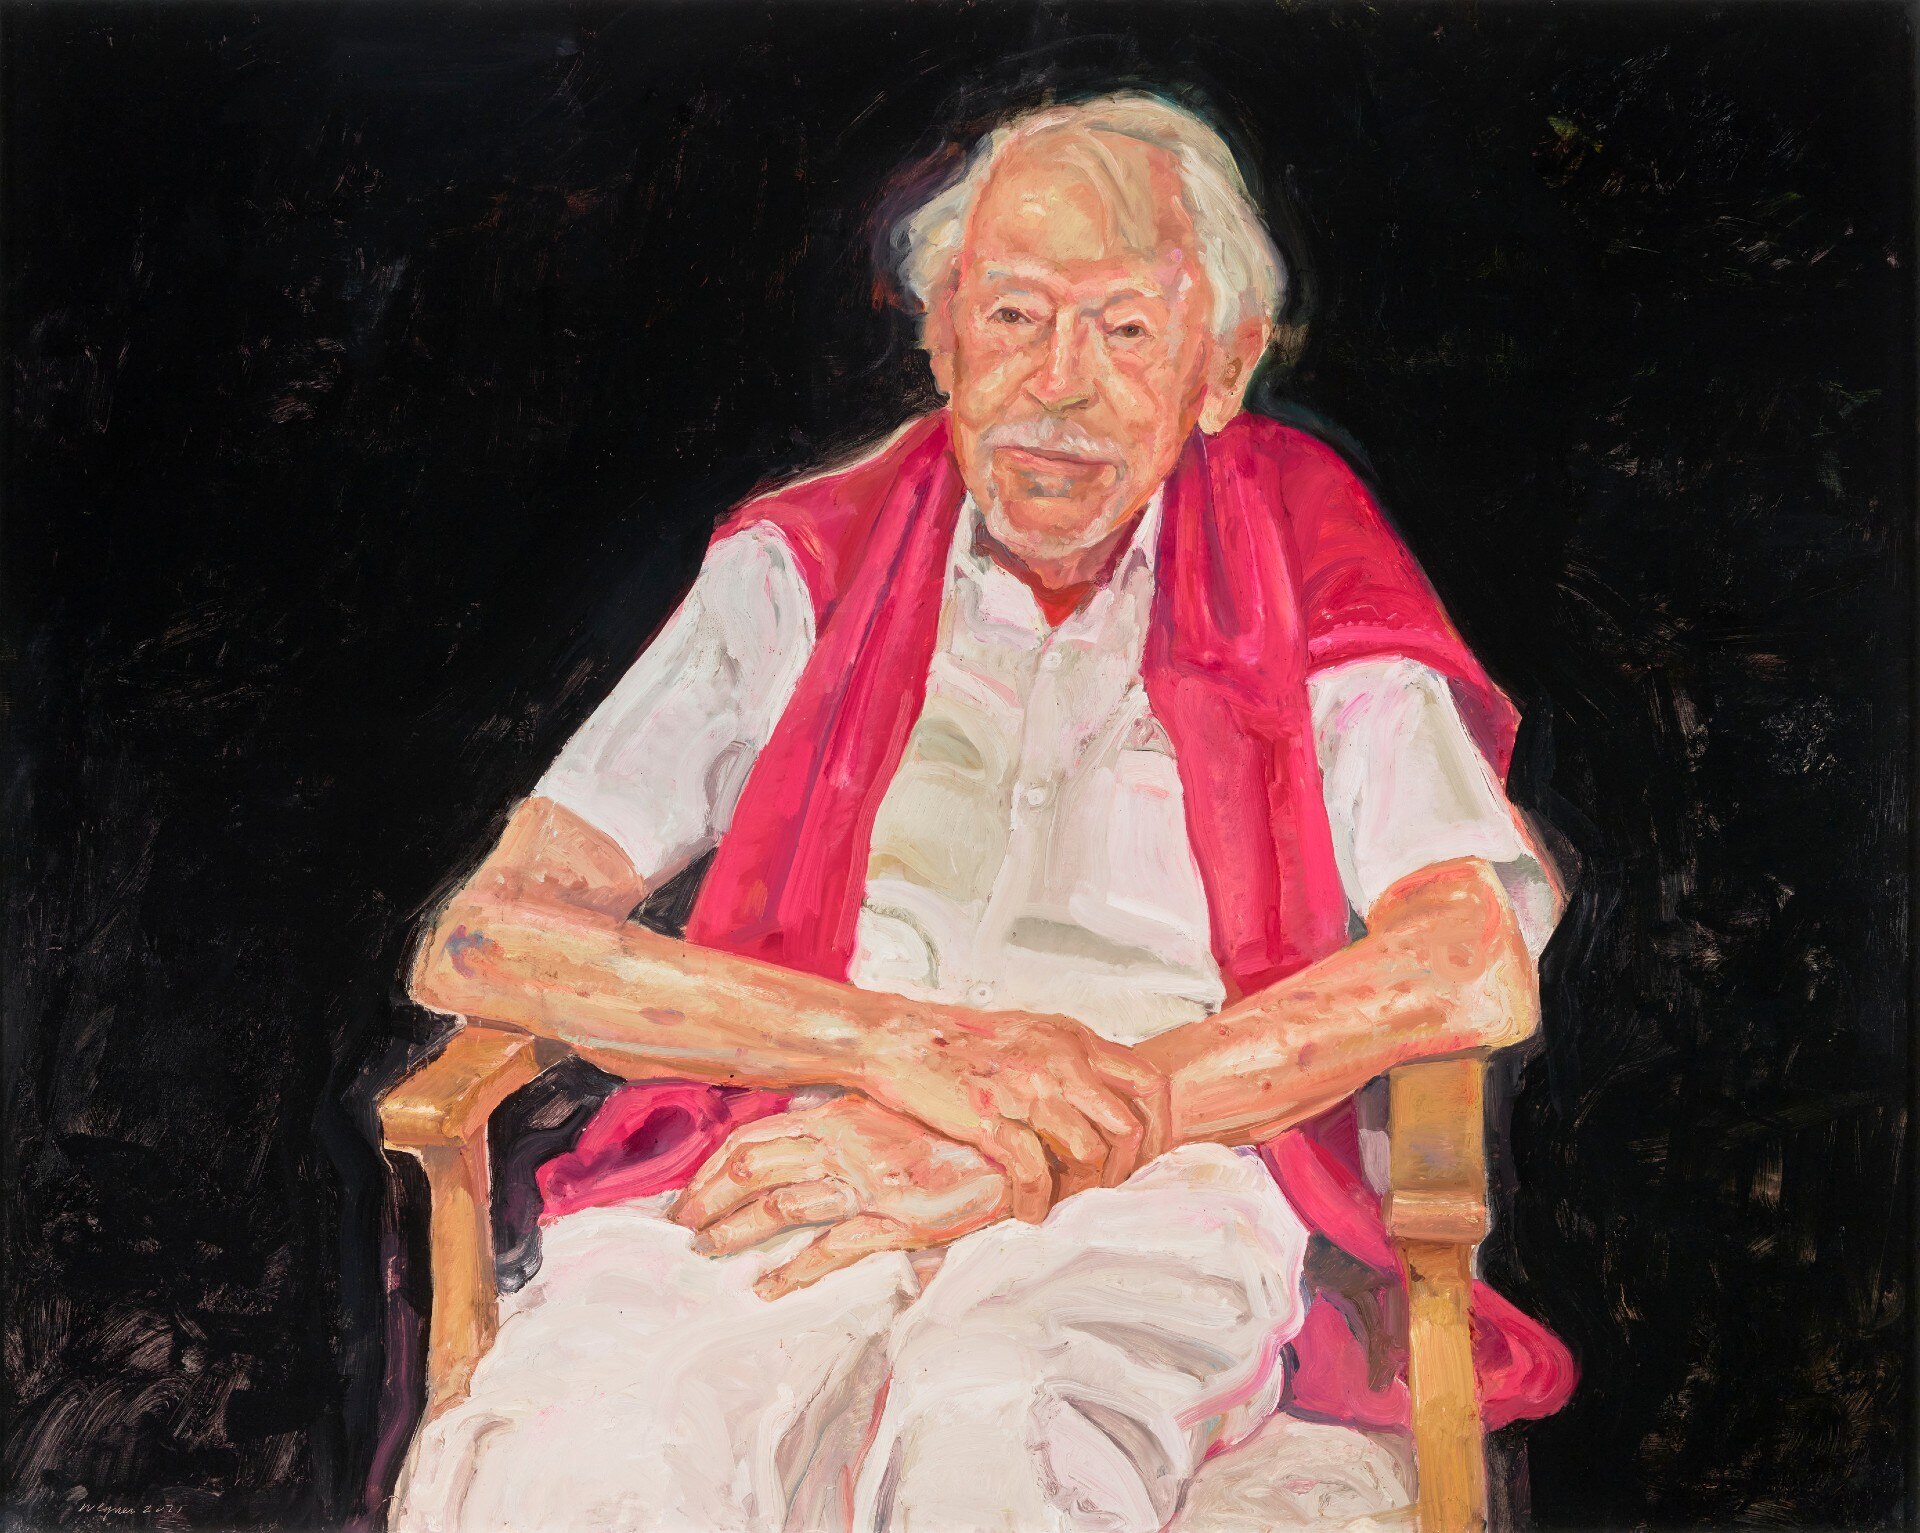 A painting of artist Guy Warren in a cane chair with his arms crossed in his lap, with a pink jumper over his shoulders